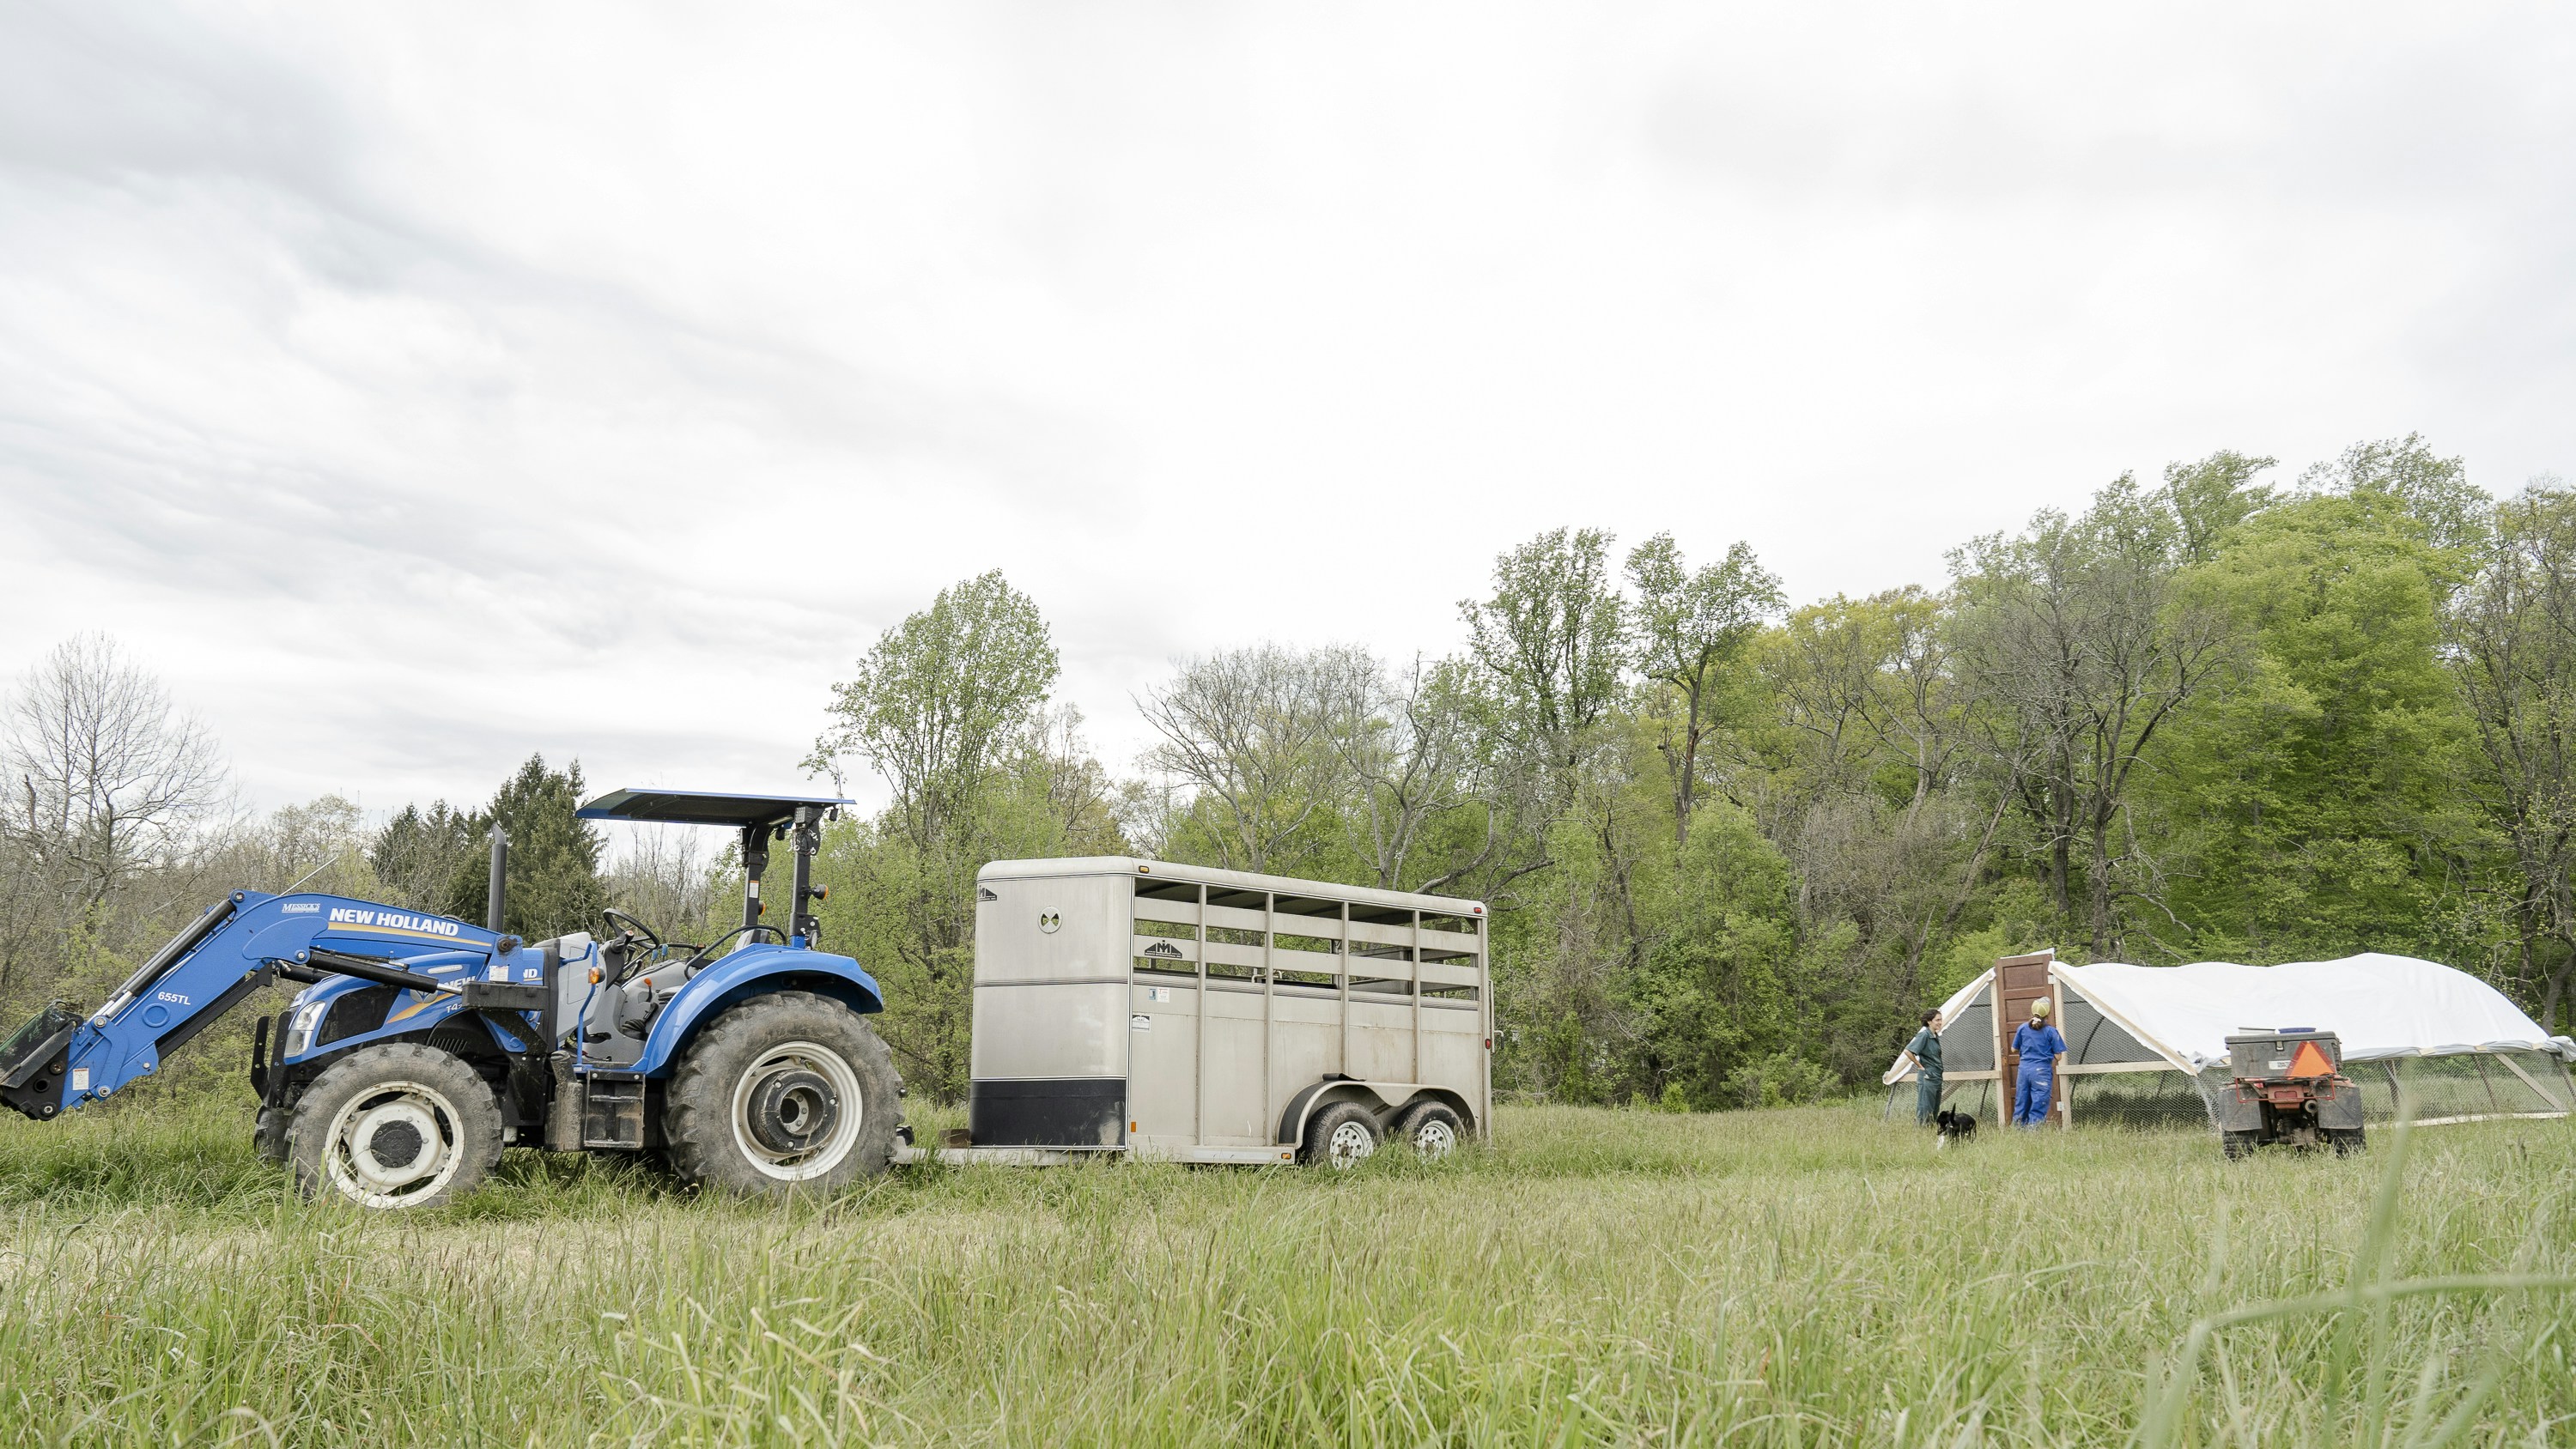 First-generation farmers at Pasture Song Farm Pottstown, PA prepare to release a trailer load of chickens onto pasture for the first time. Pasture Song is a small-scale, sustainable meat and cut-flower farm.</p>
<p>More photography at http://zoeschaeffer.com and http://instagram.com/dirtjoy</p>
<p>More from the farm at http://pasturesongfarm.com</p>
<p>#regenerativeagriculture #organicfarming #regenerativefarming #farming #youngfarmers #flowerfarm» style=»max-width:400px;float:left;padding:10px 10px 10px 0px;border:0px;»></p>
                            </div><!-- .entry-content -->
        
                                    
                <footer class=